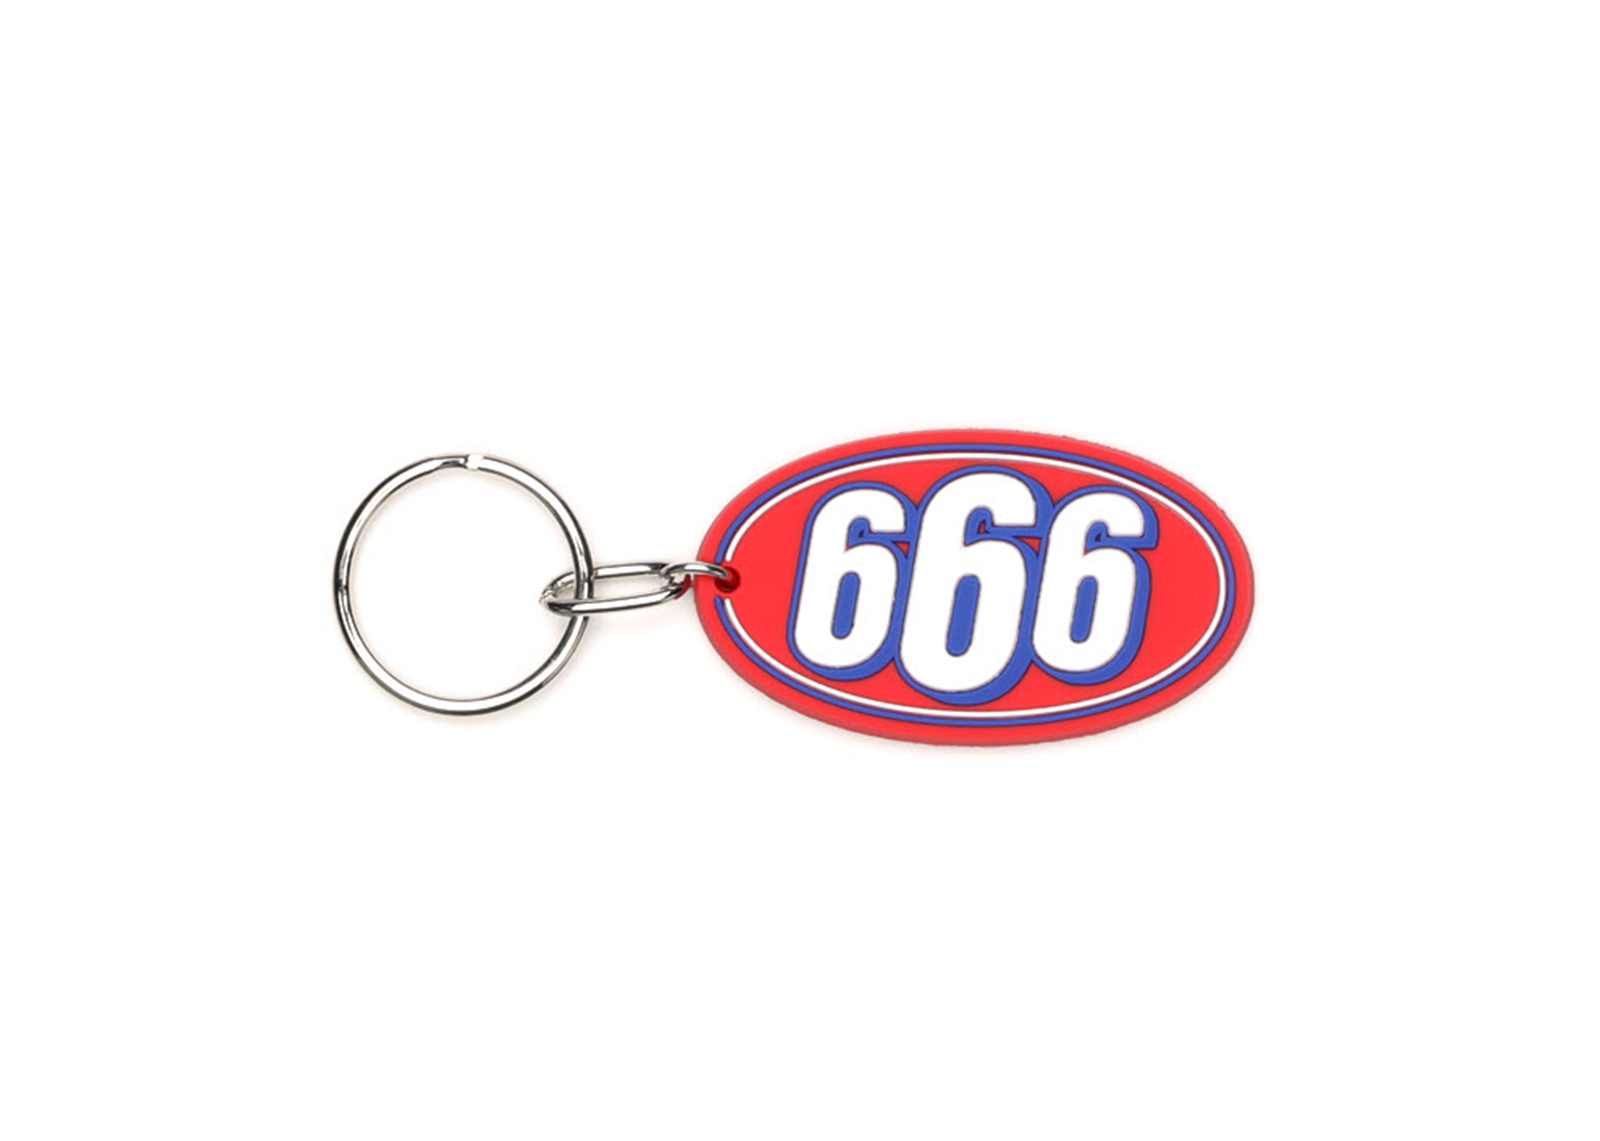 Supreme 666 Keychain Red - SS17 - US